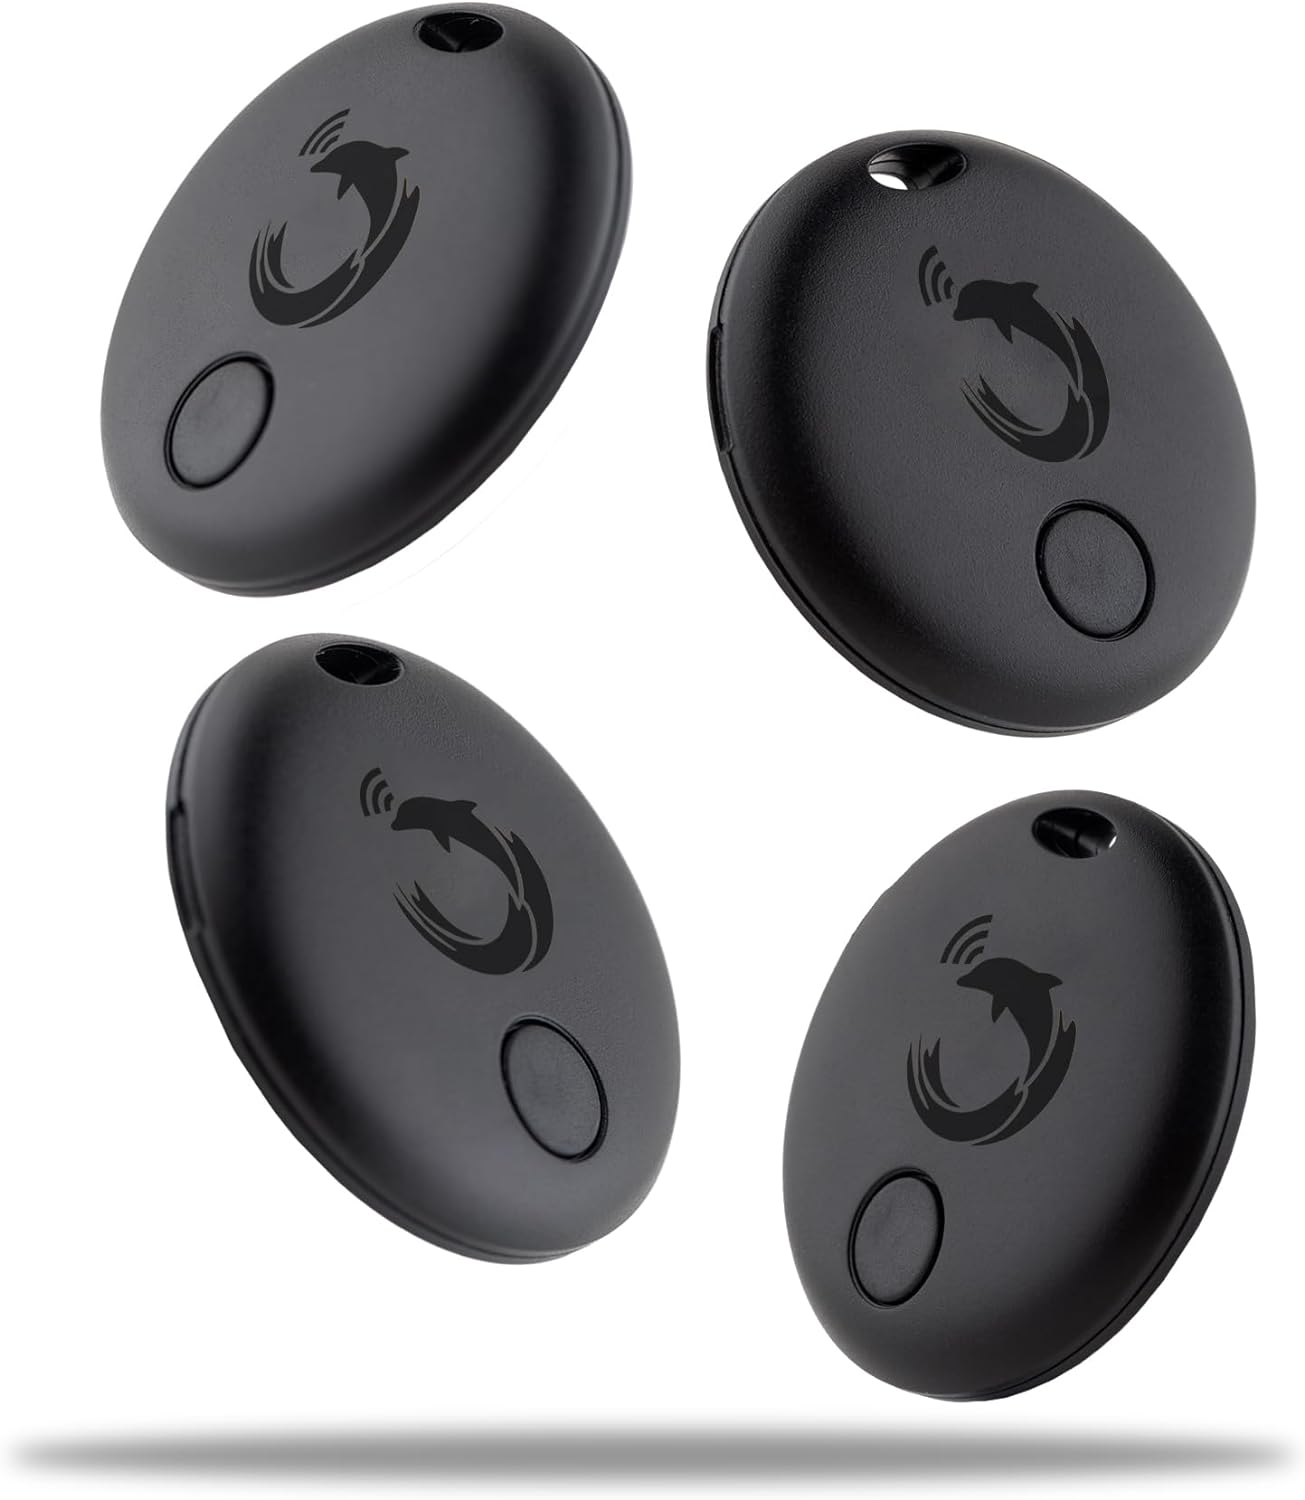 Dolphin Smart Tracker Pro-Pack 4